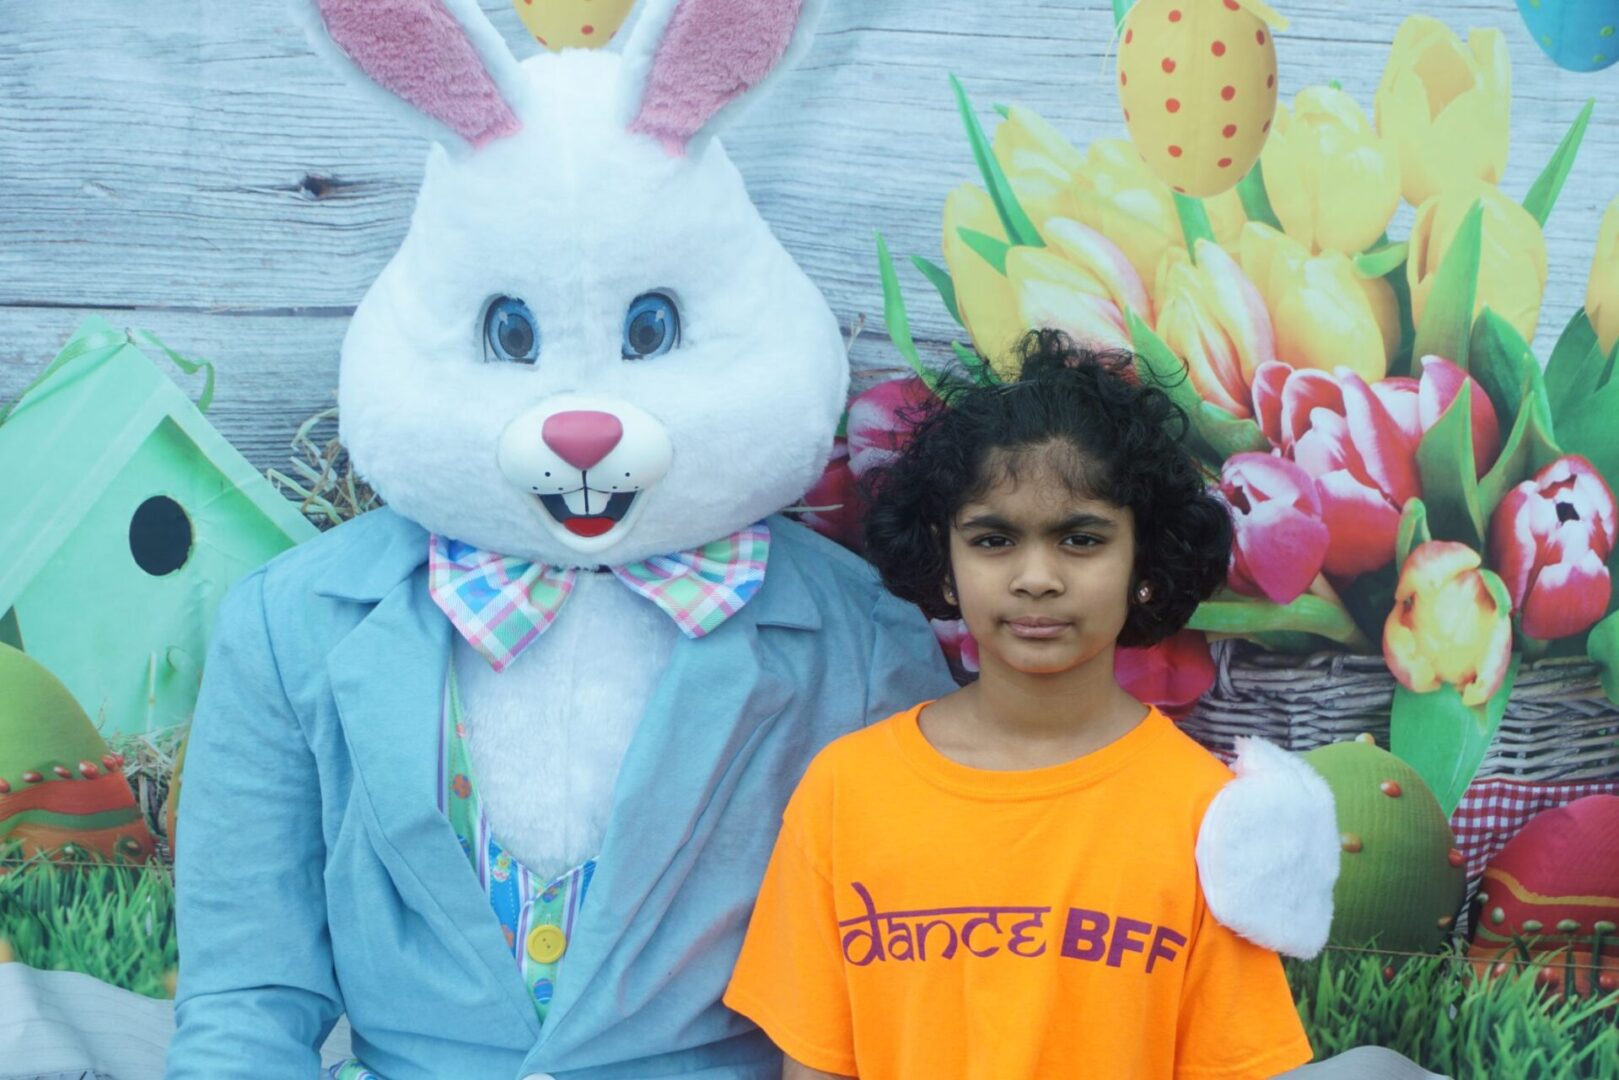 The bunny mascot and a girl in an orange shirt and pink earrings